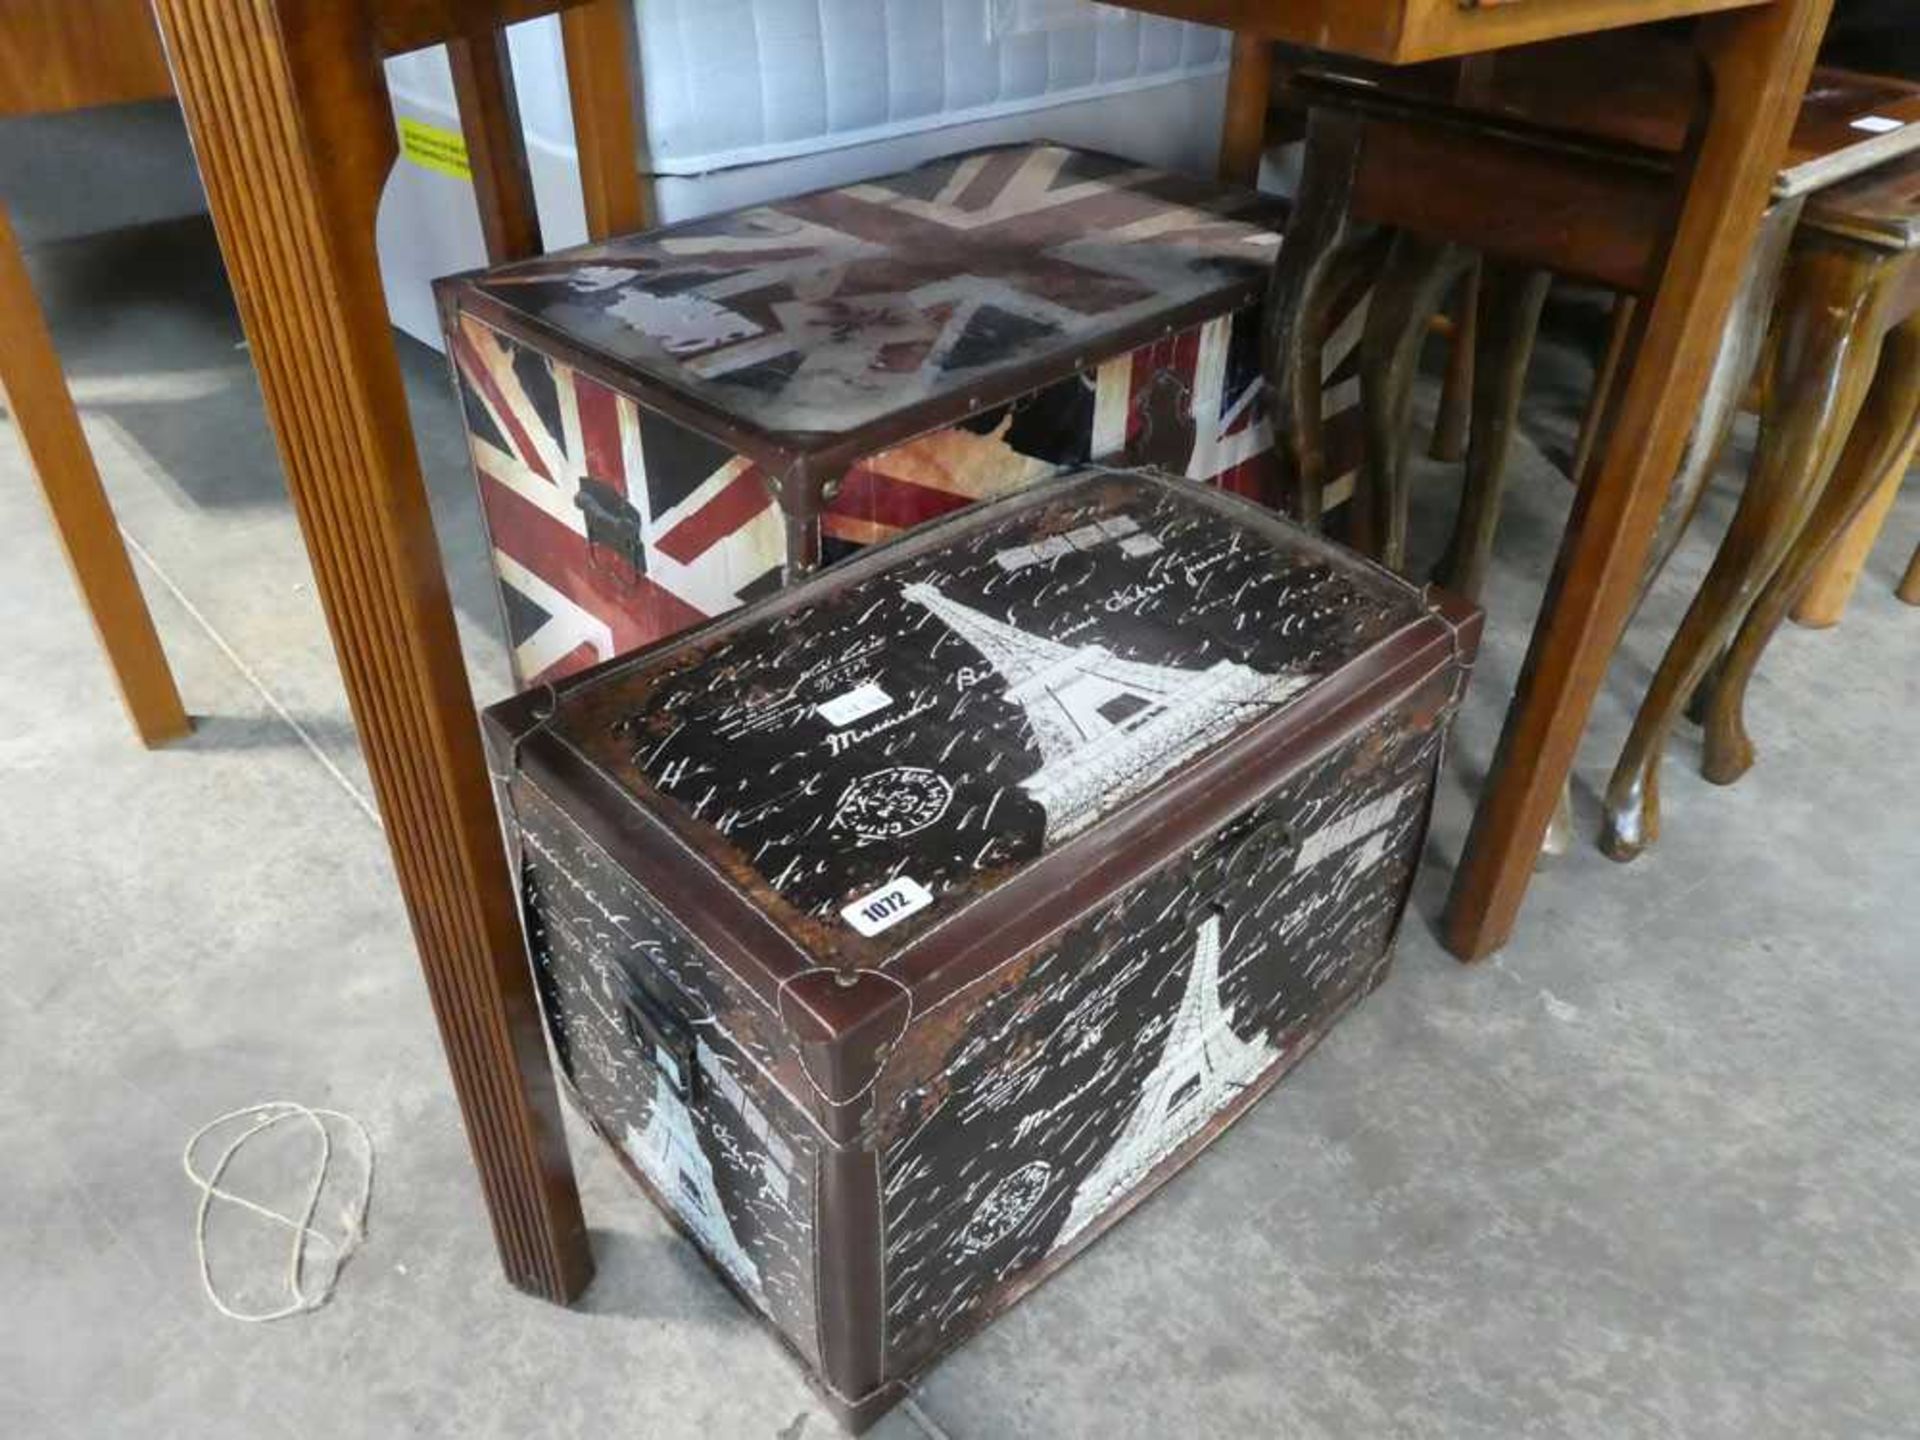 Union Jack trunk with Paris themed trunk